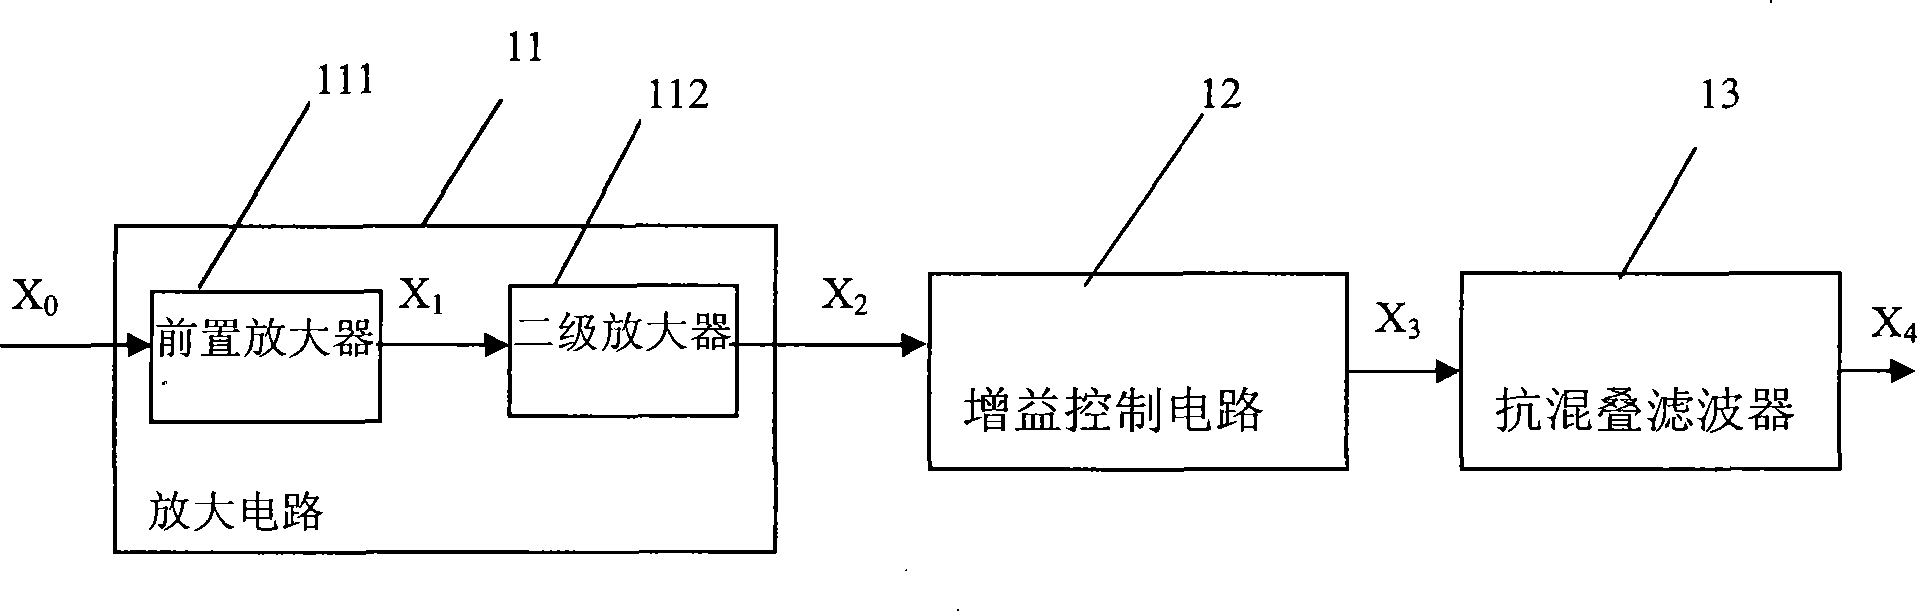 Apparatus for detecting weak signal based on time-frequency transformation